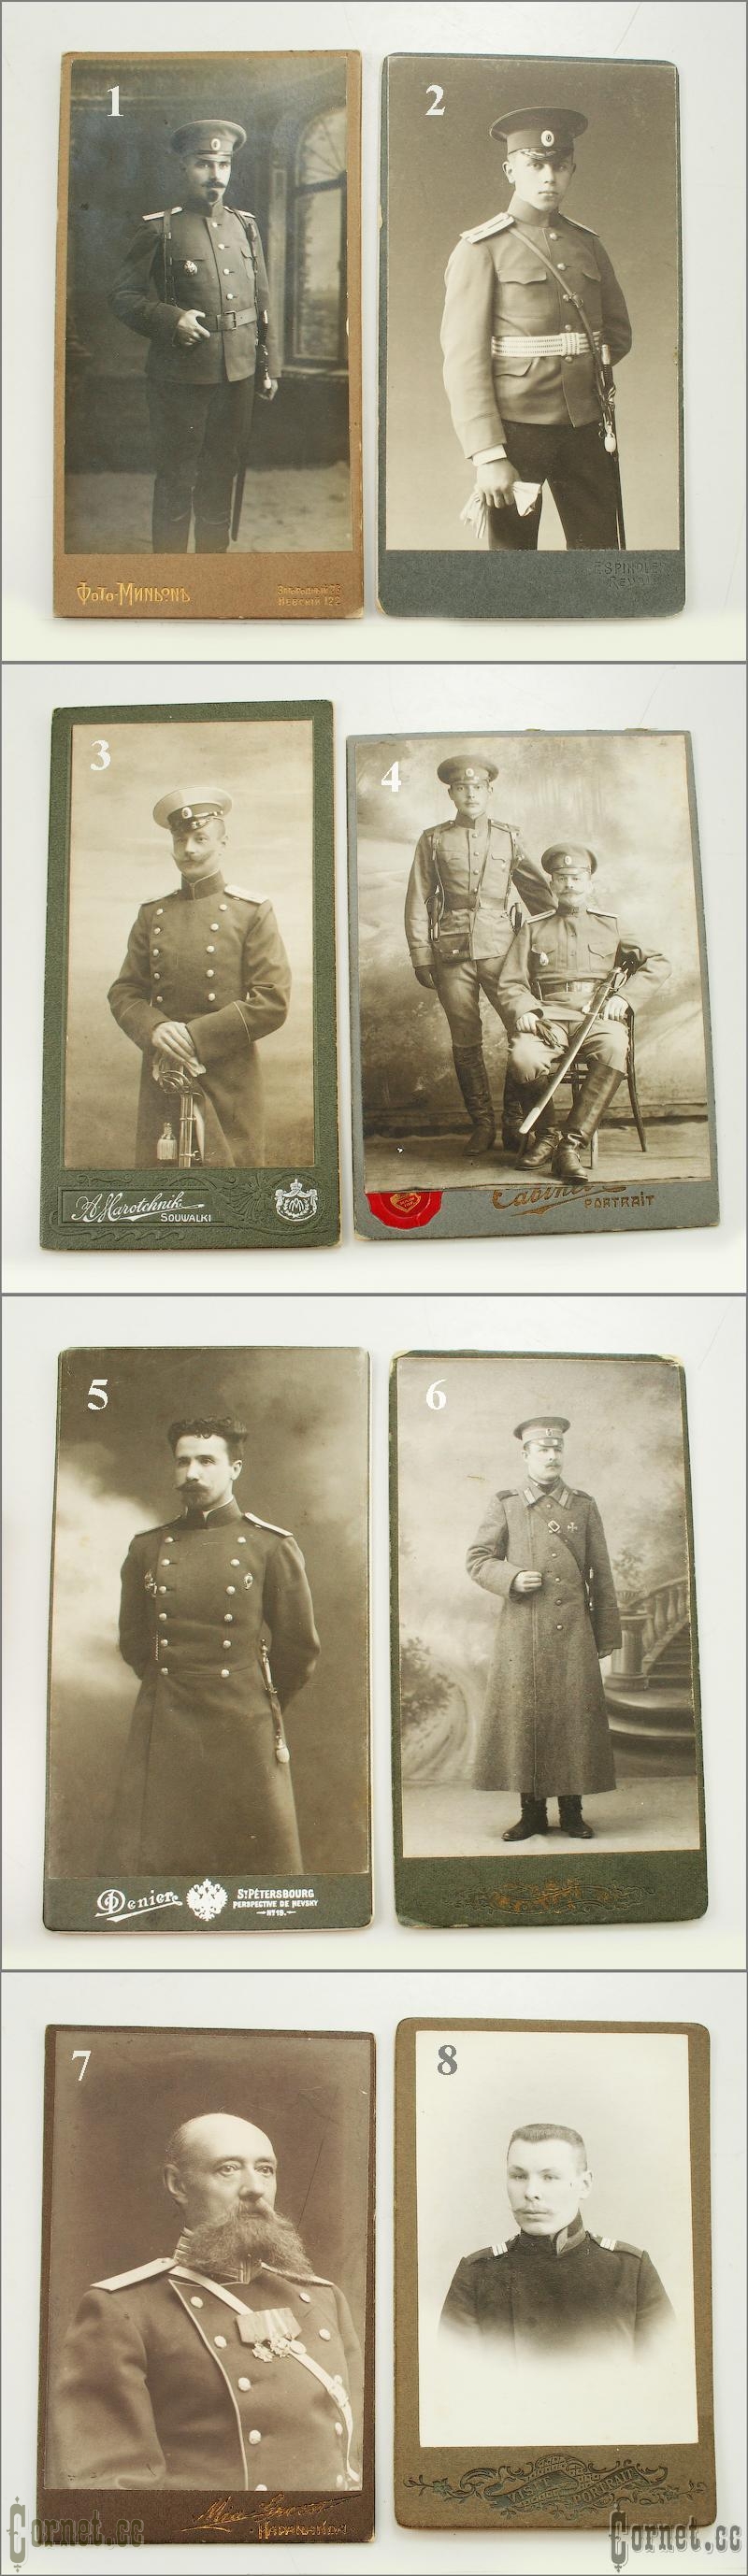 Photograpfy of Russian army officers